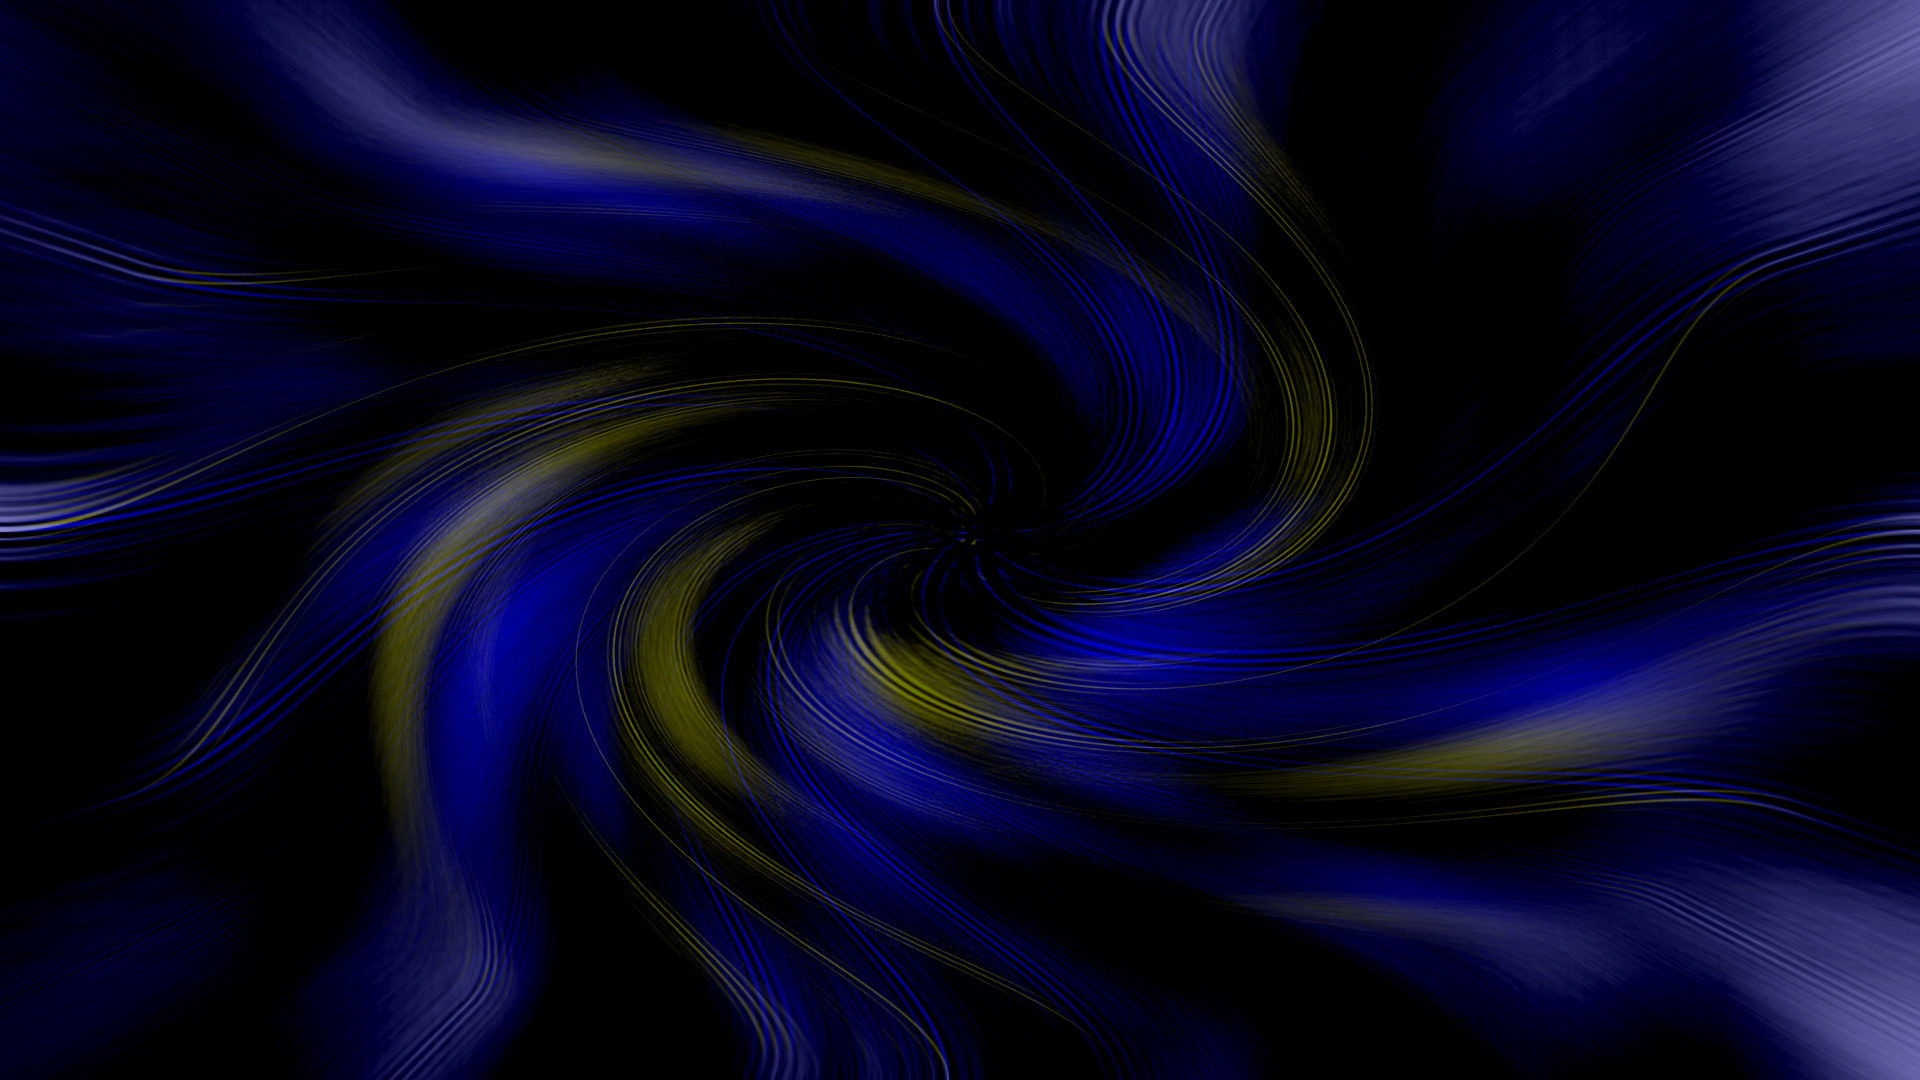 1920x1080 blue and gold swirl abstract hd wallpaper 1920Ã1080 29218. Â«Â«